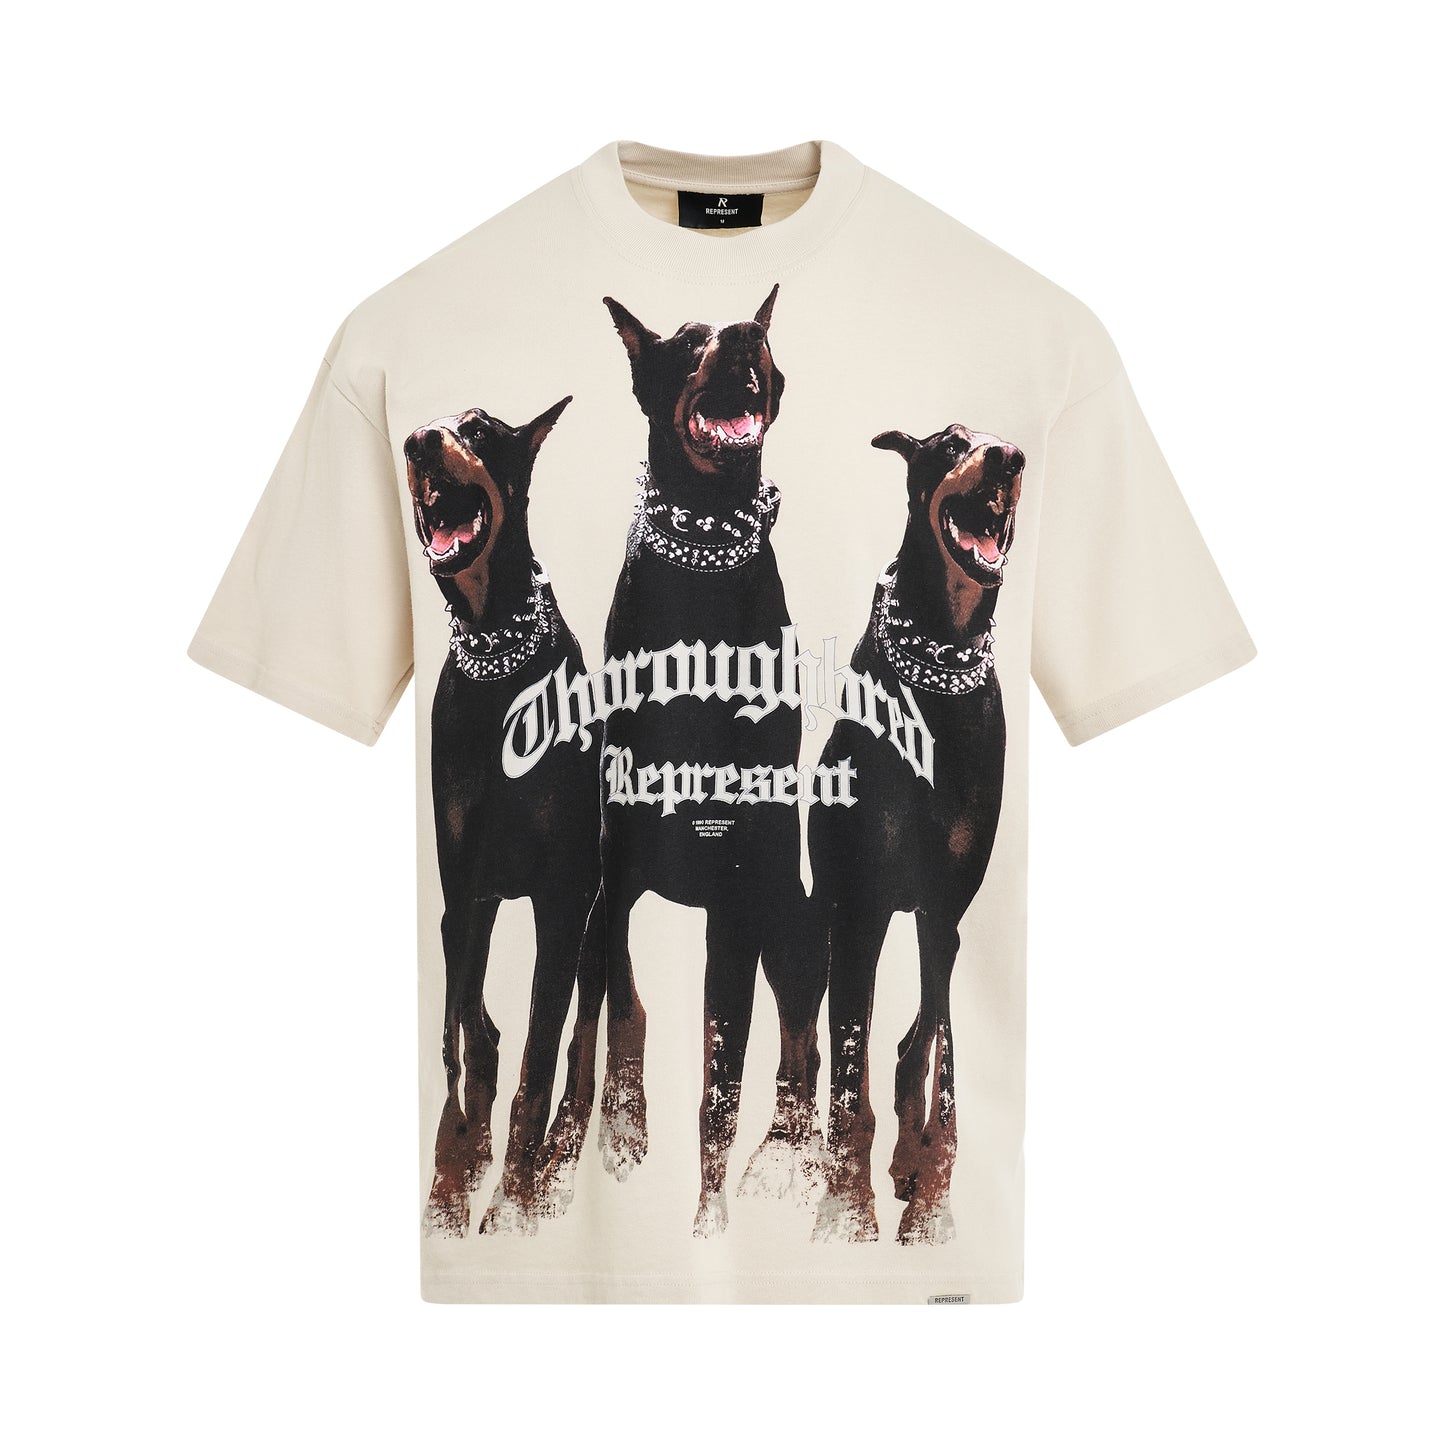 Thoroughbred T-Shirt in Vintage White